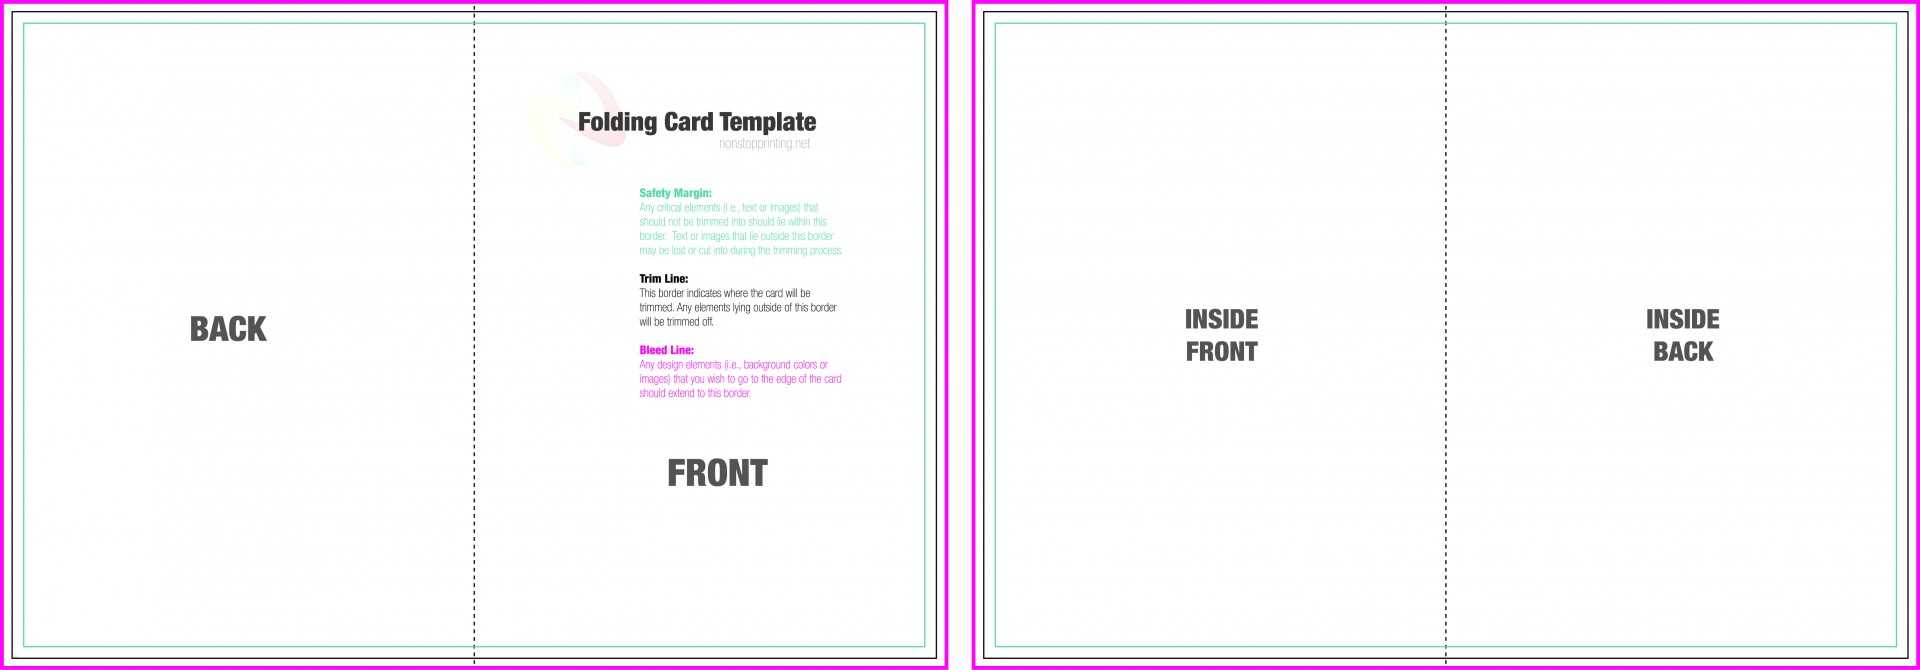 Stupendous Quarter Fold Card Template Photoshop Ideas With Regard To Foldable Card Template Word